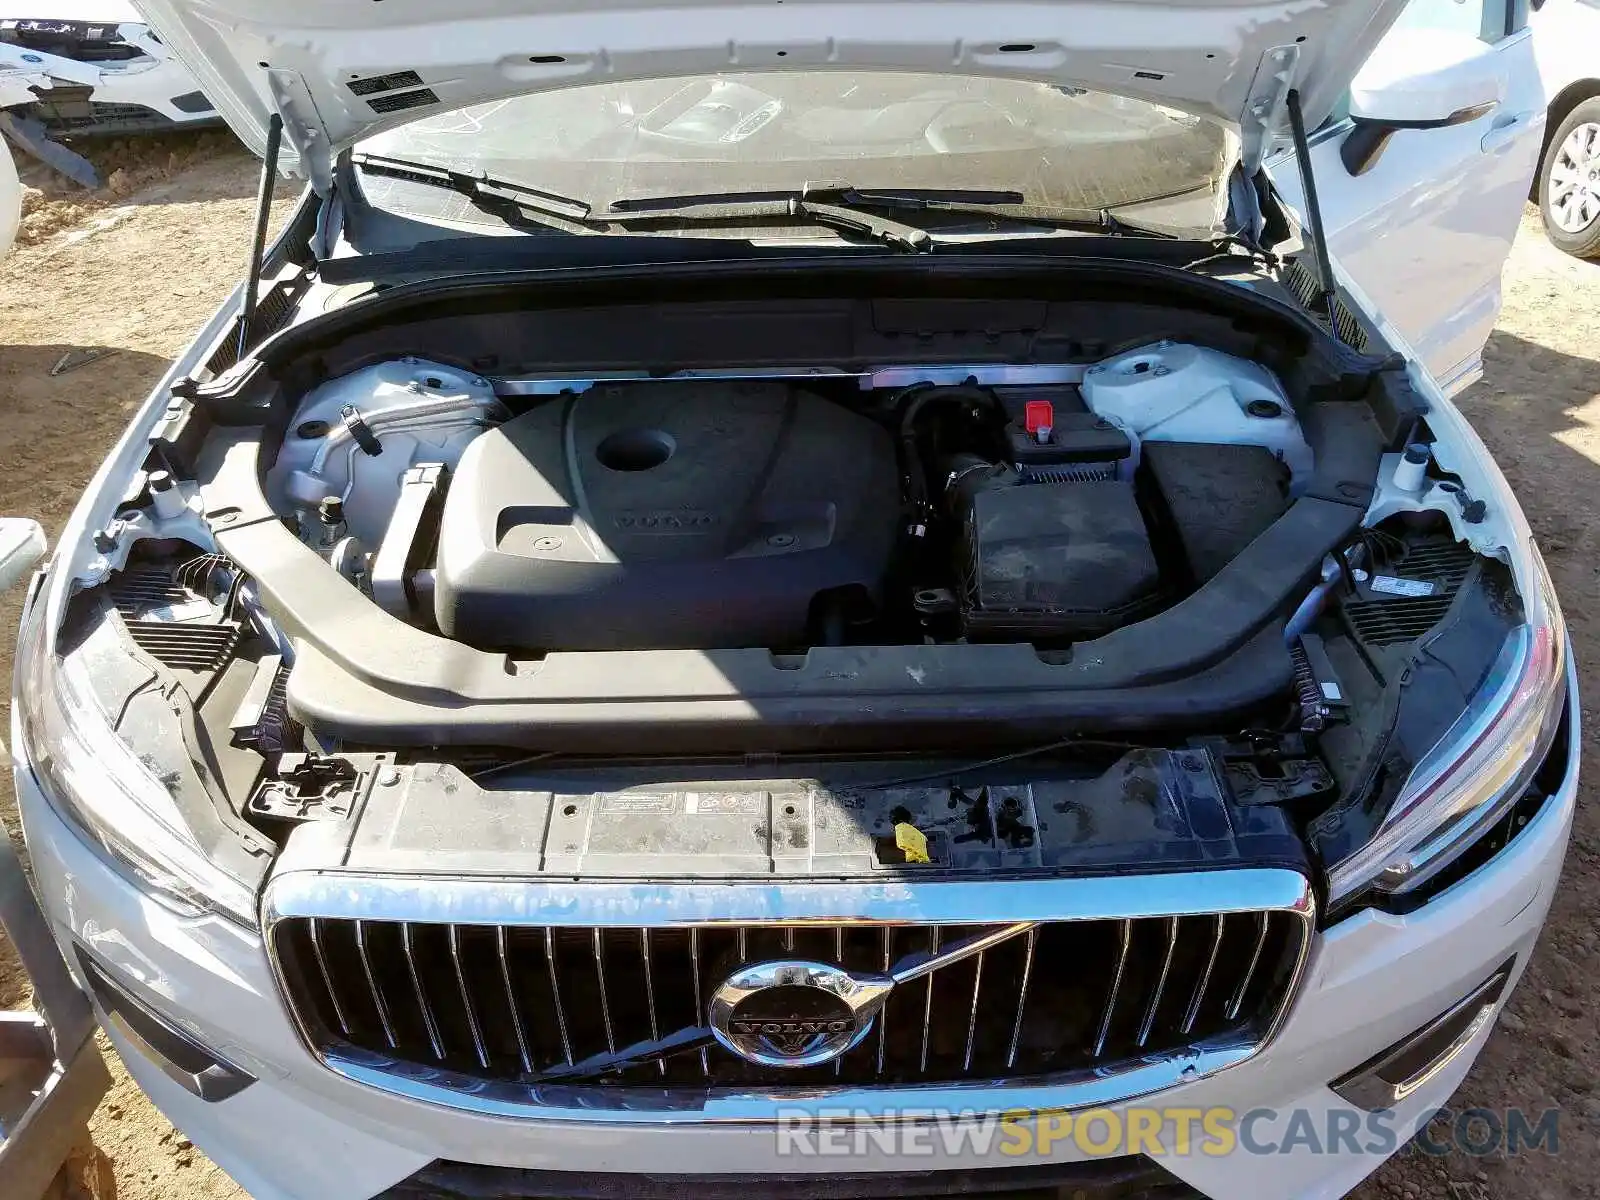 7 Photograph of a damaged car LYV102RL2KB283455 VOLVO XC60 T5 IN 2019